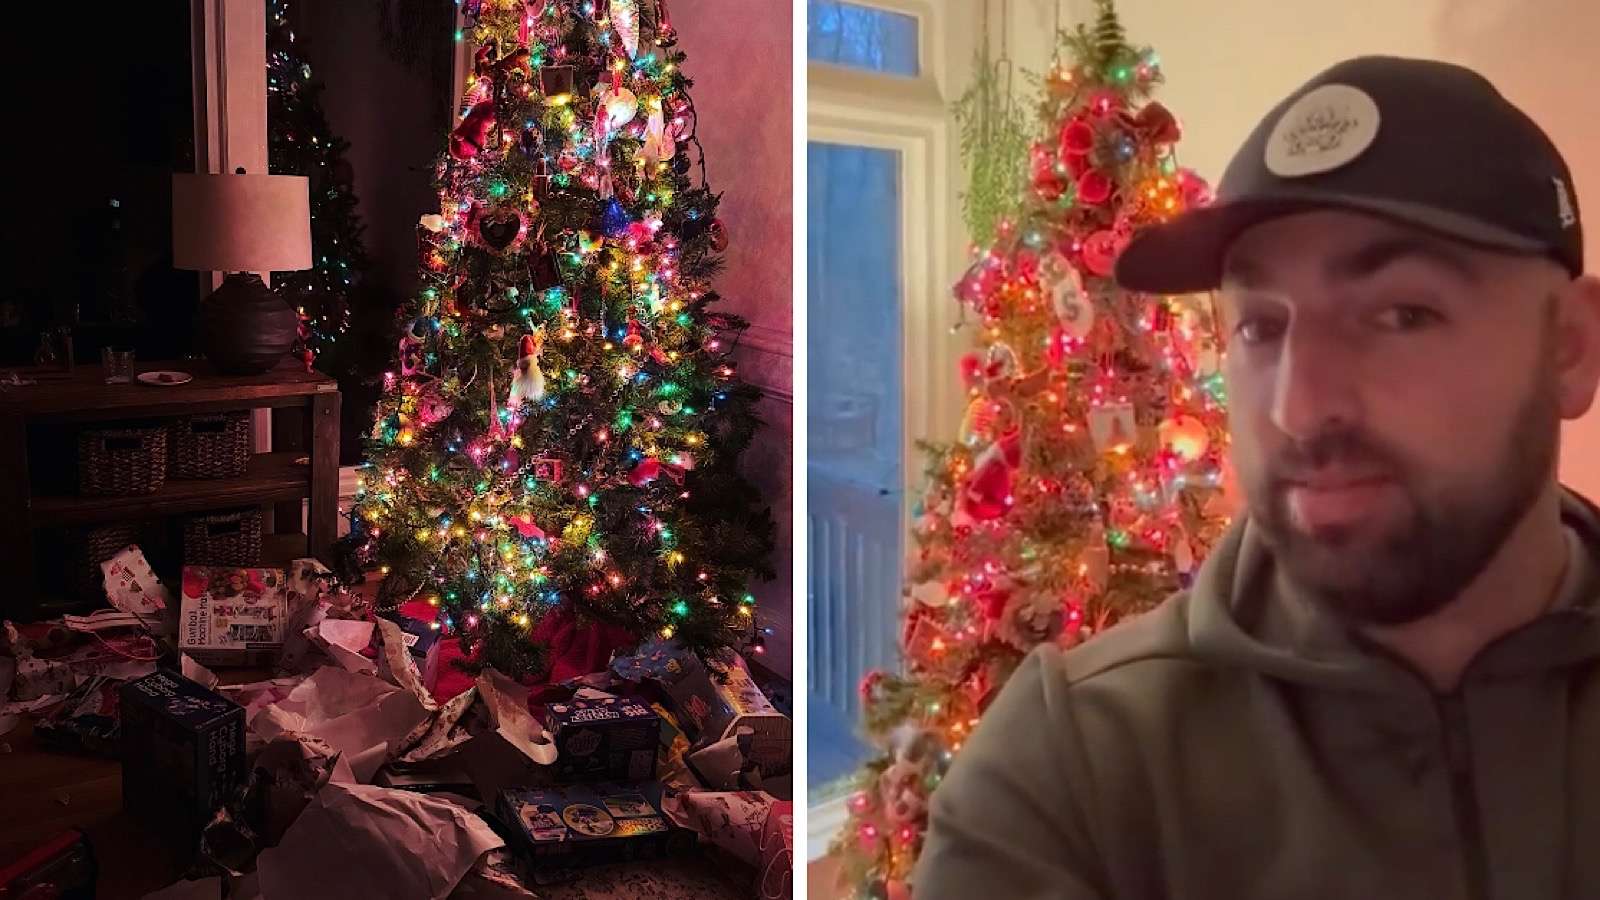 toddler opens everyon's Christmas gifts in the middle of the night